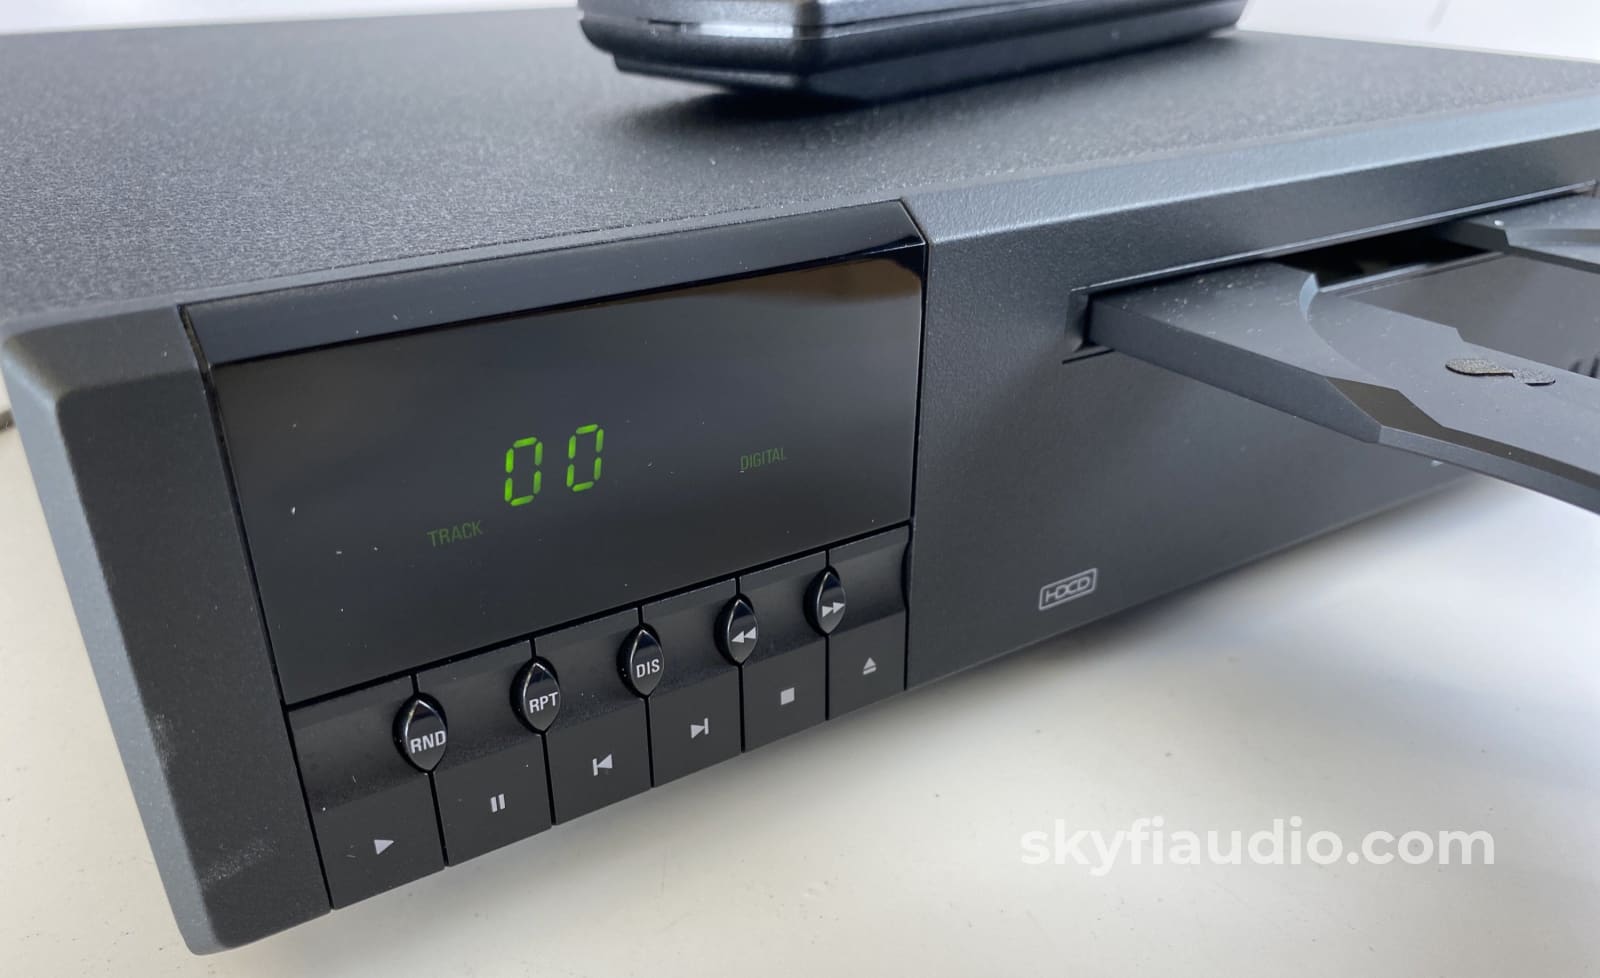 Linn Ikemi Cd Player With Mekto Mechanism - Includes Remote And Working Perfectly + Digital